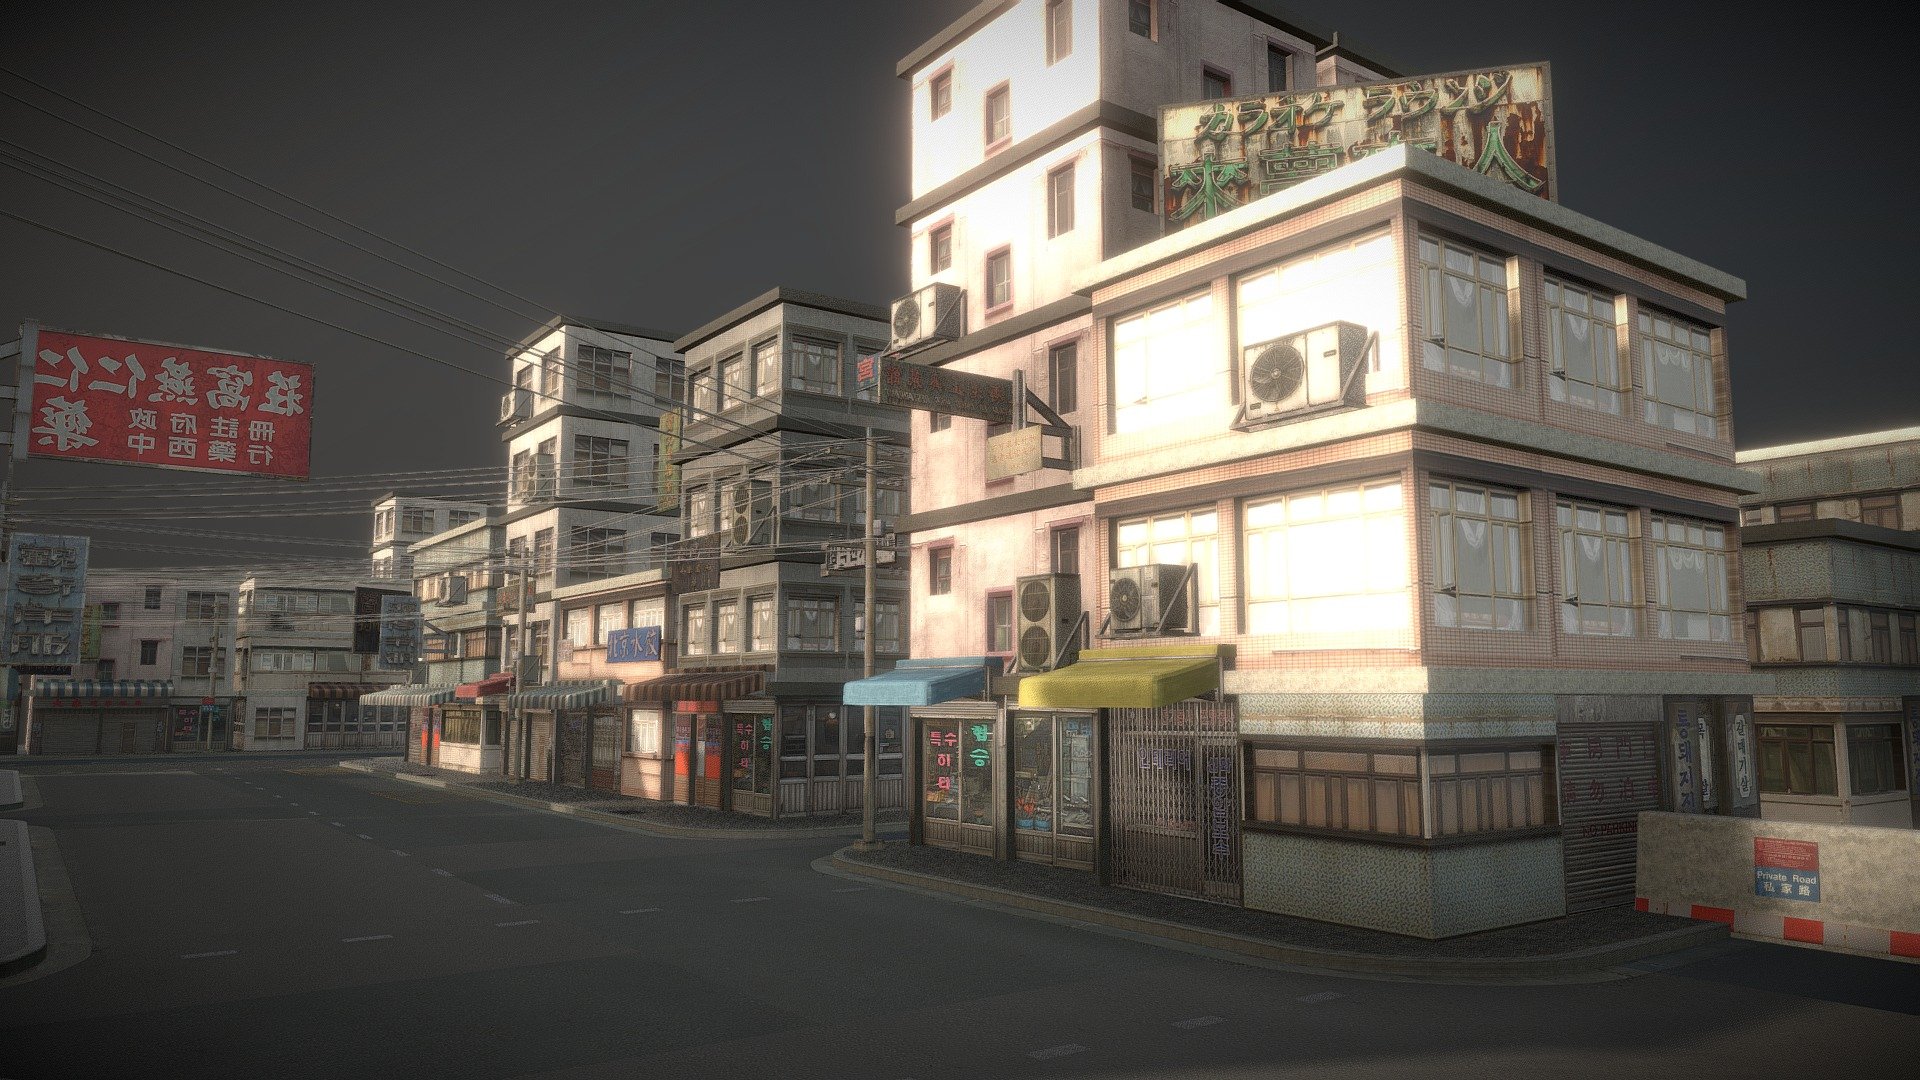 Streets of Asia - Modular Environment
Unity Assets - Streets of Asia - Modular Environment- Chinatown - 3D model by fxmedia 3d model